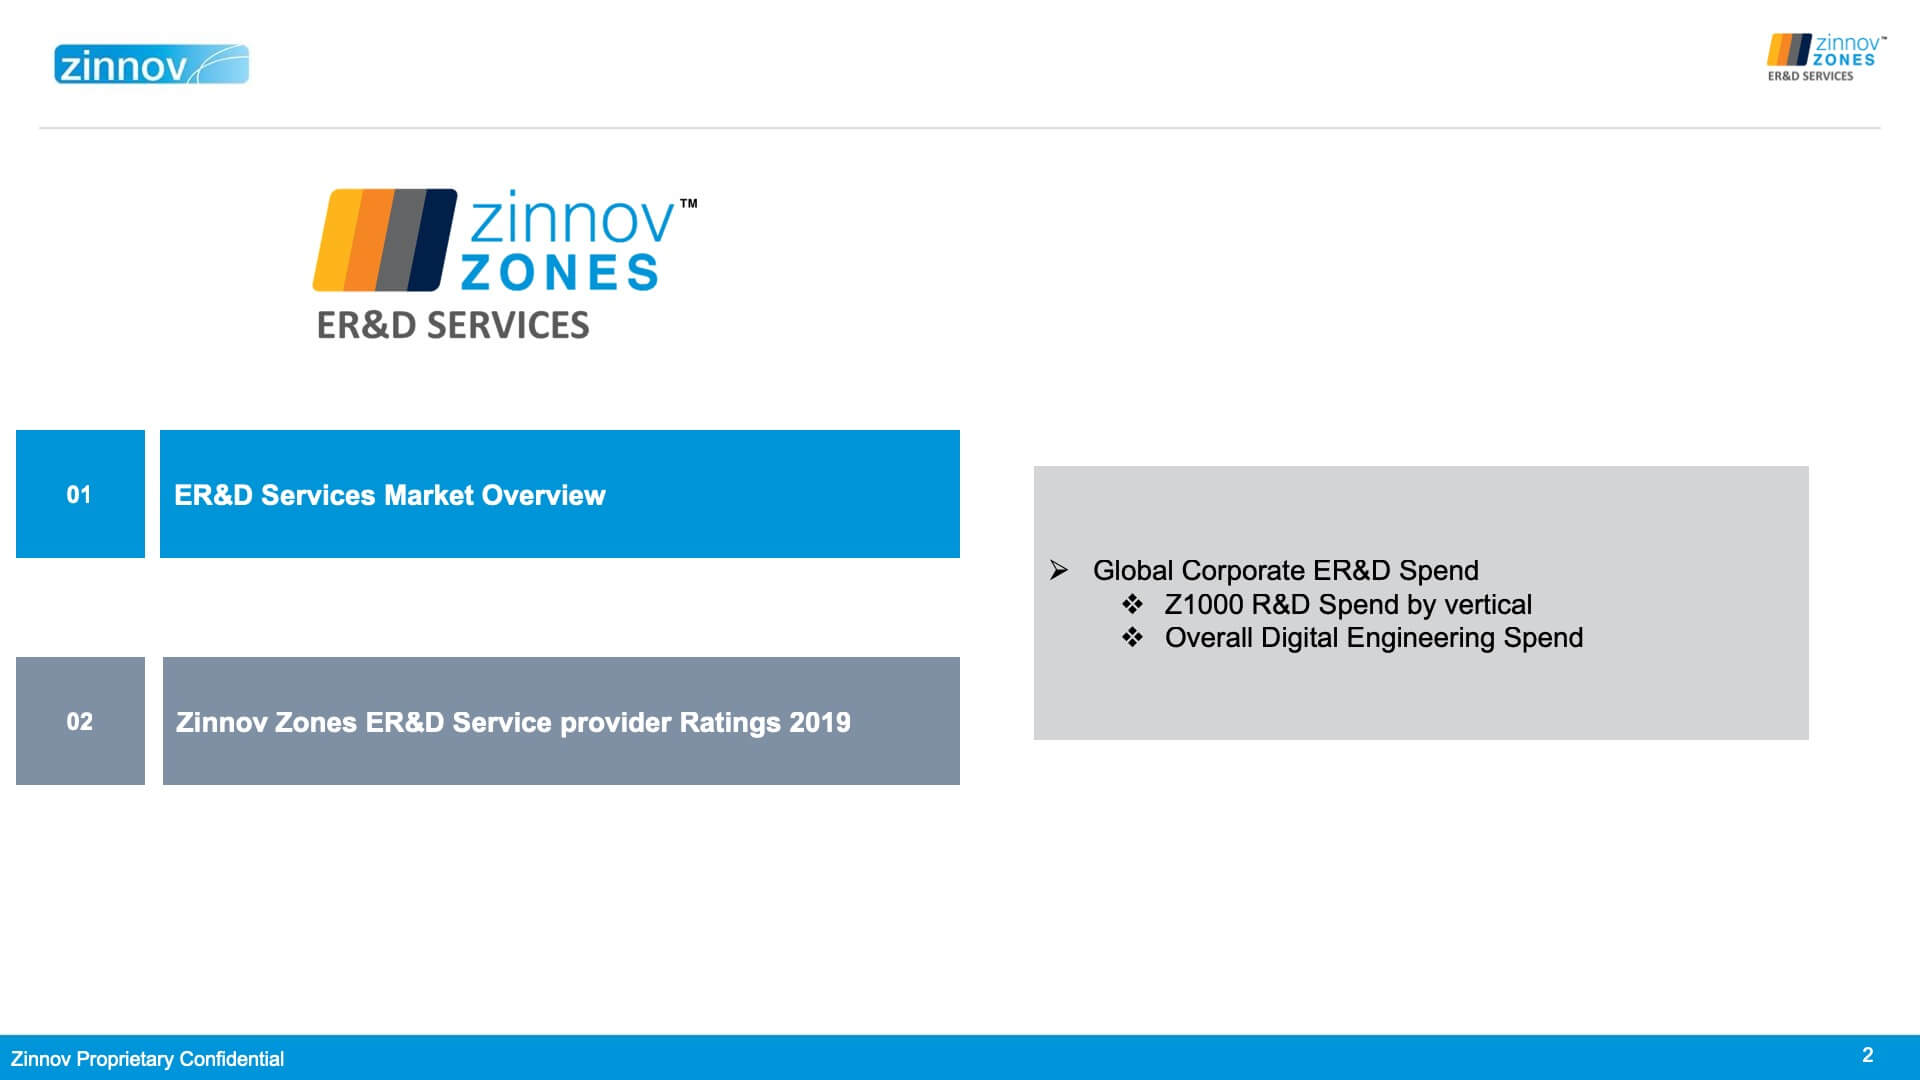 Zinnov Zones 2019 for Engineering R&D Services